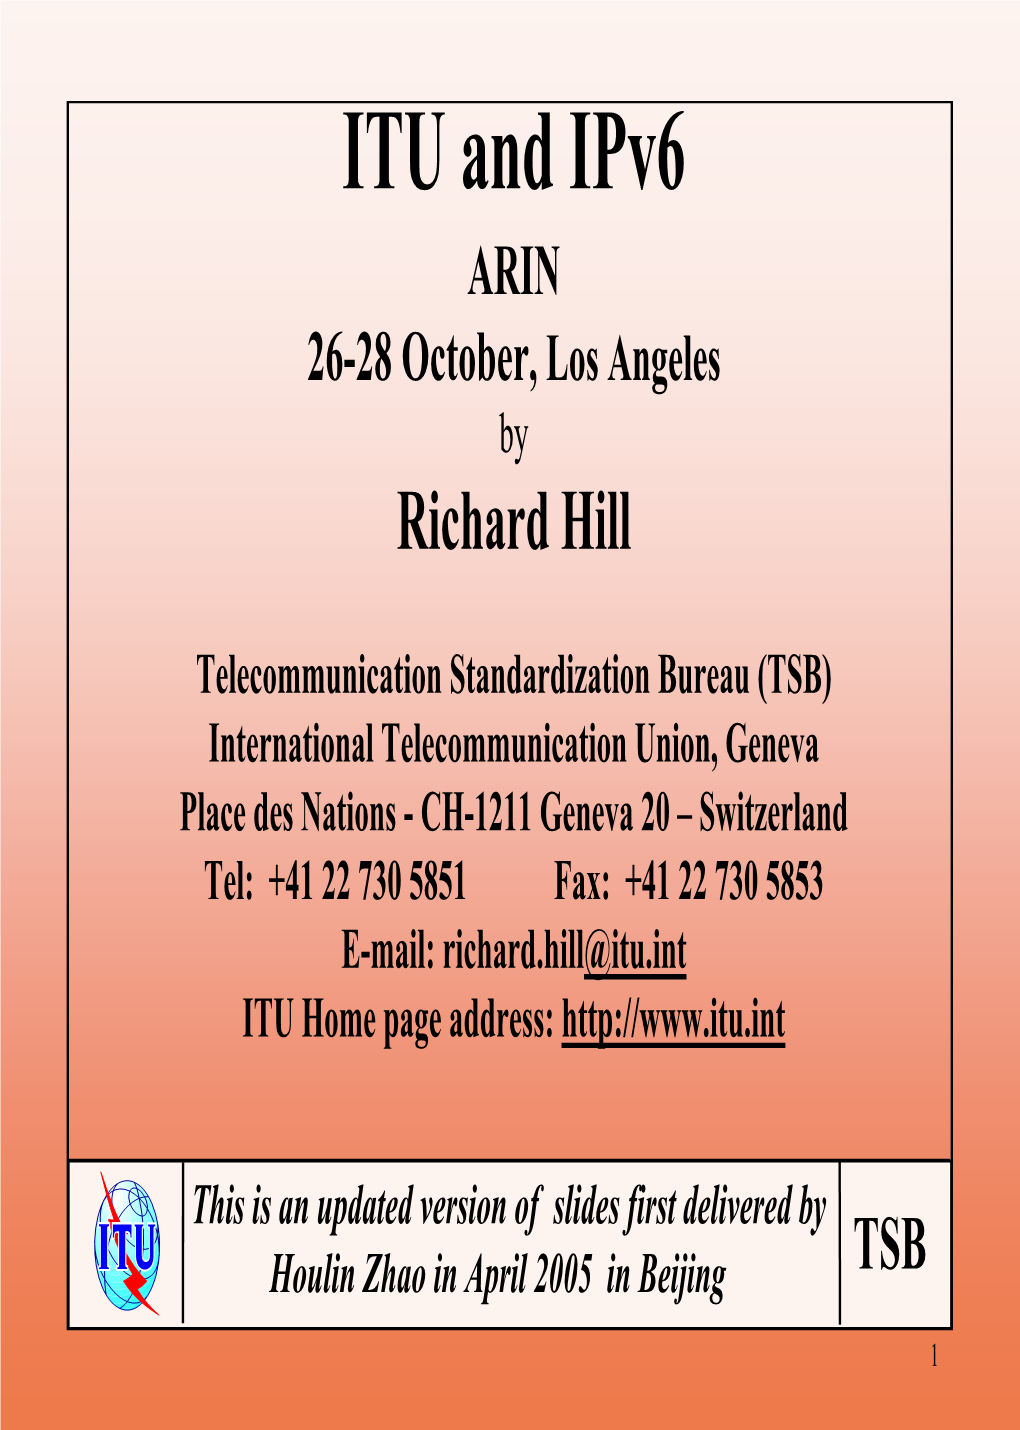 ITU and Ipv6 ARIN 26-28 October, Los Angeles by Richard Hill